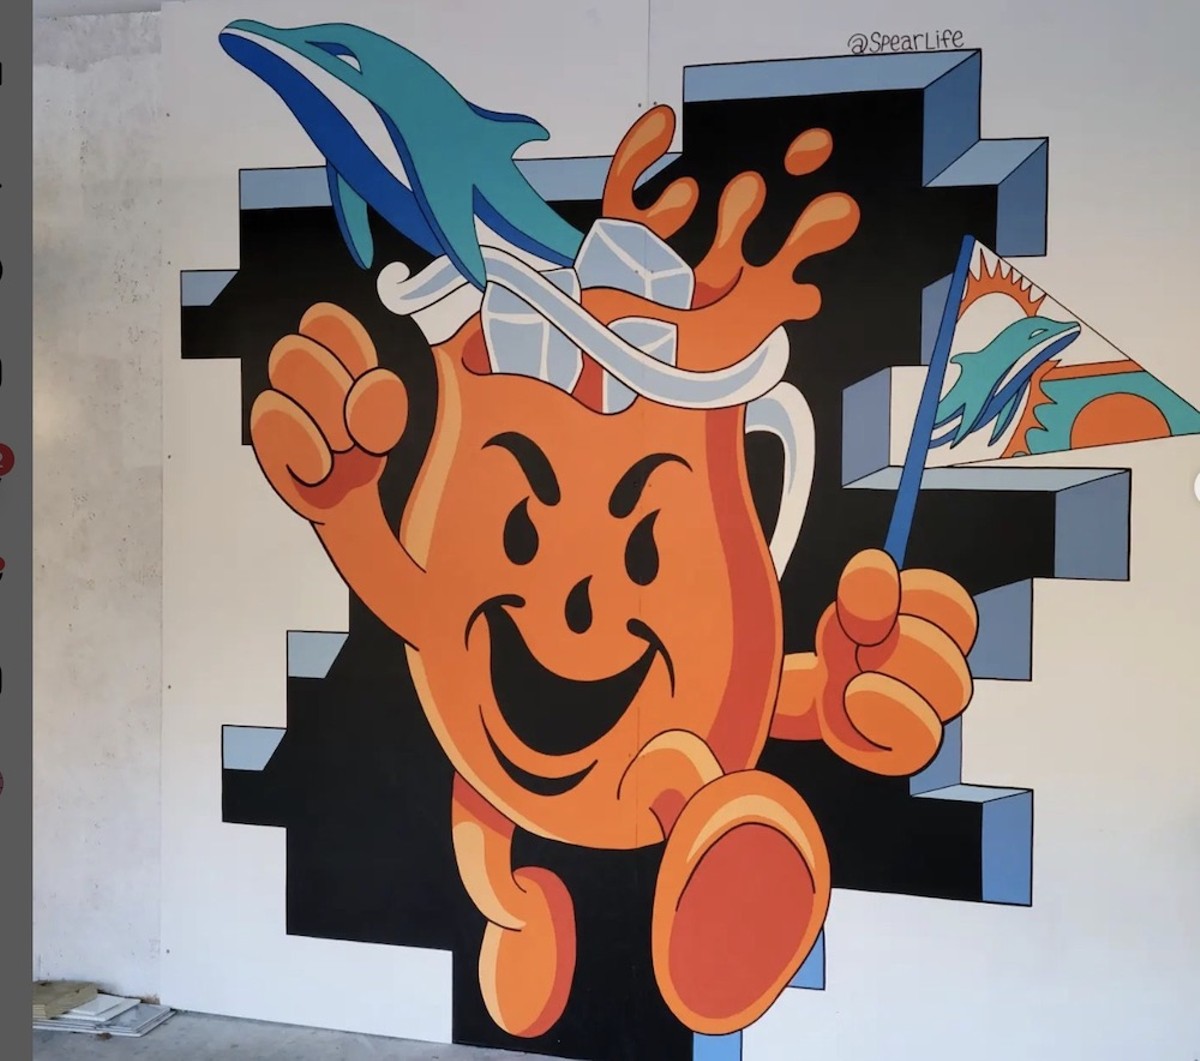 Best Drinking of the Kool-Aid: Andrew Spear ‘Kool-Aid Man’ mural at The Hideaway